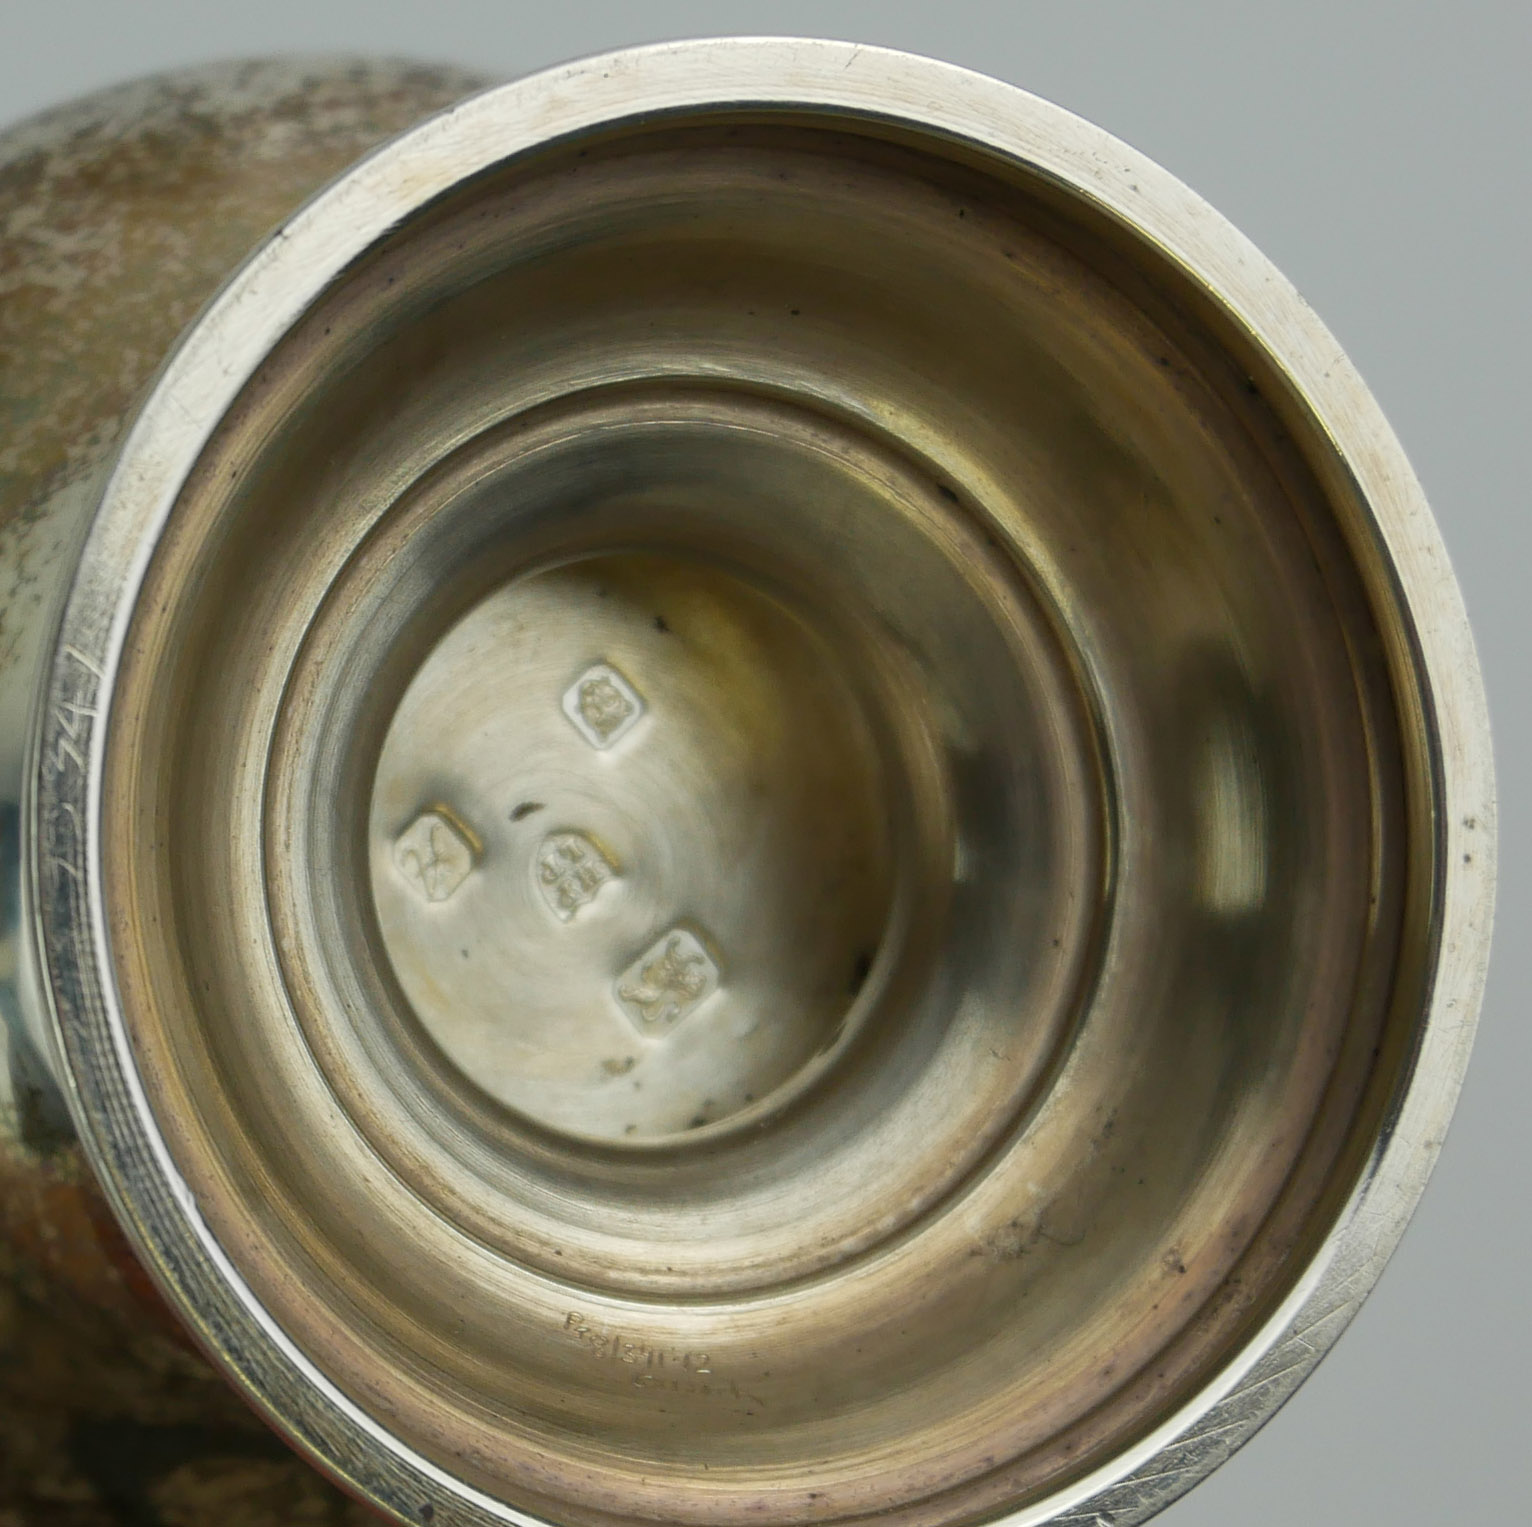 TWO 20TH CENTURY SILVER CASTERS Having a domed lid, on a baluster base, hallmarked London, 1975 - Image 2 of 3